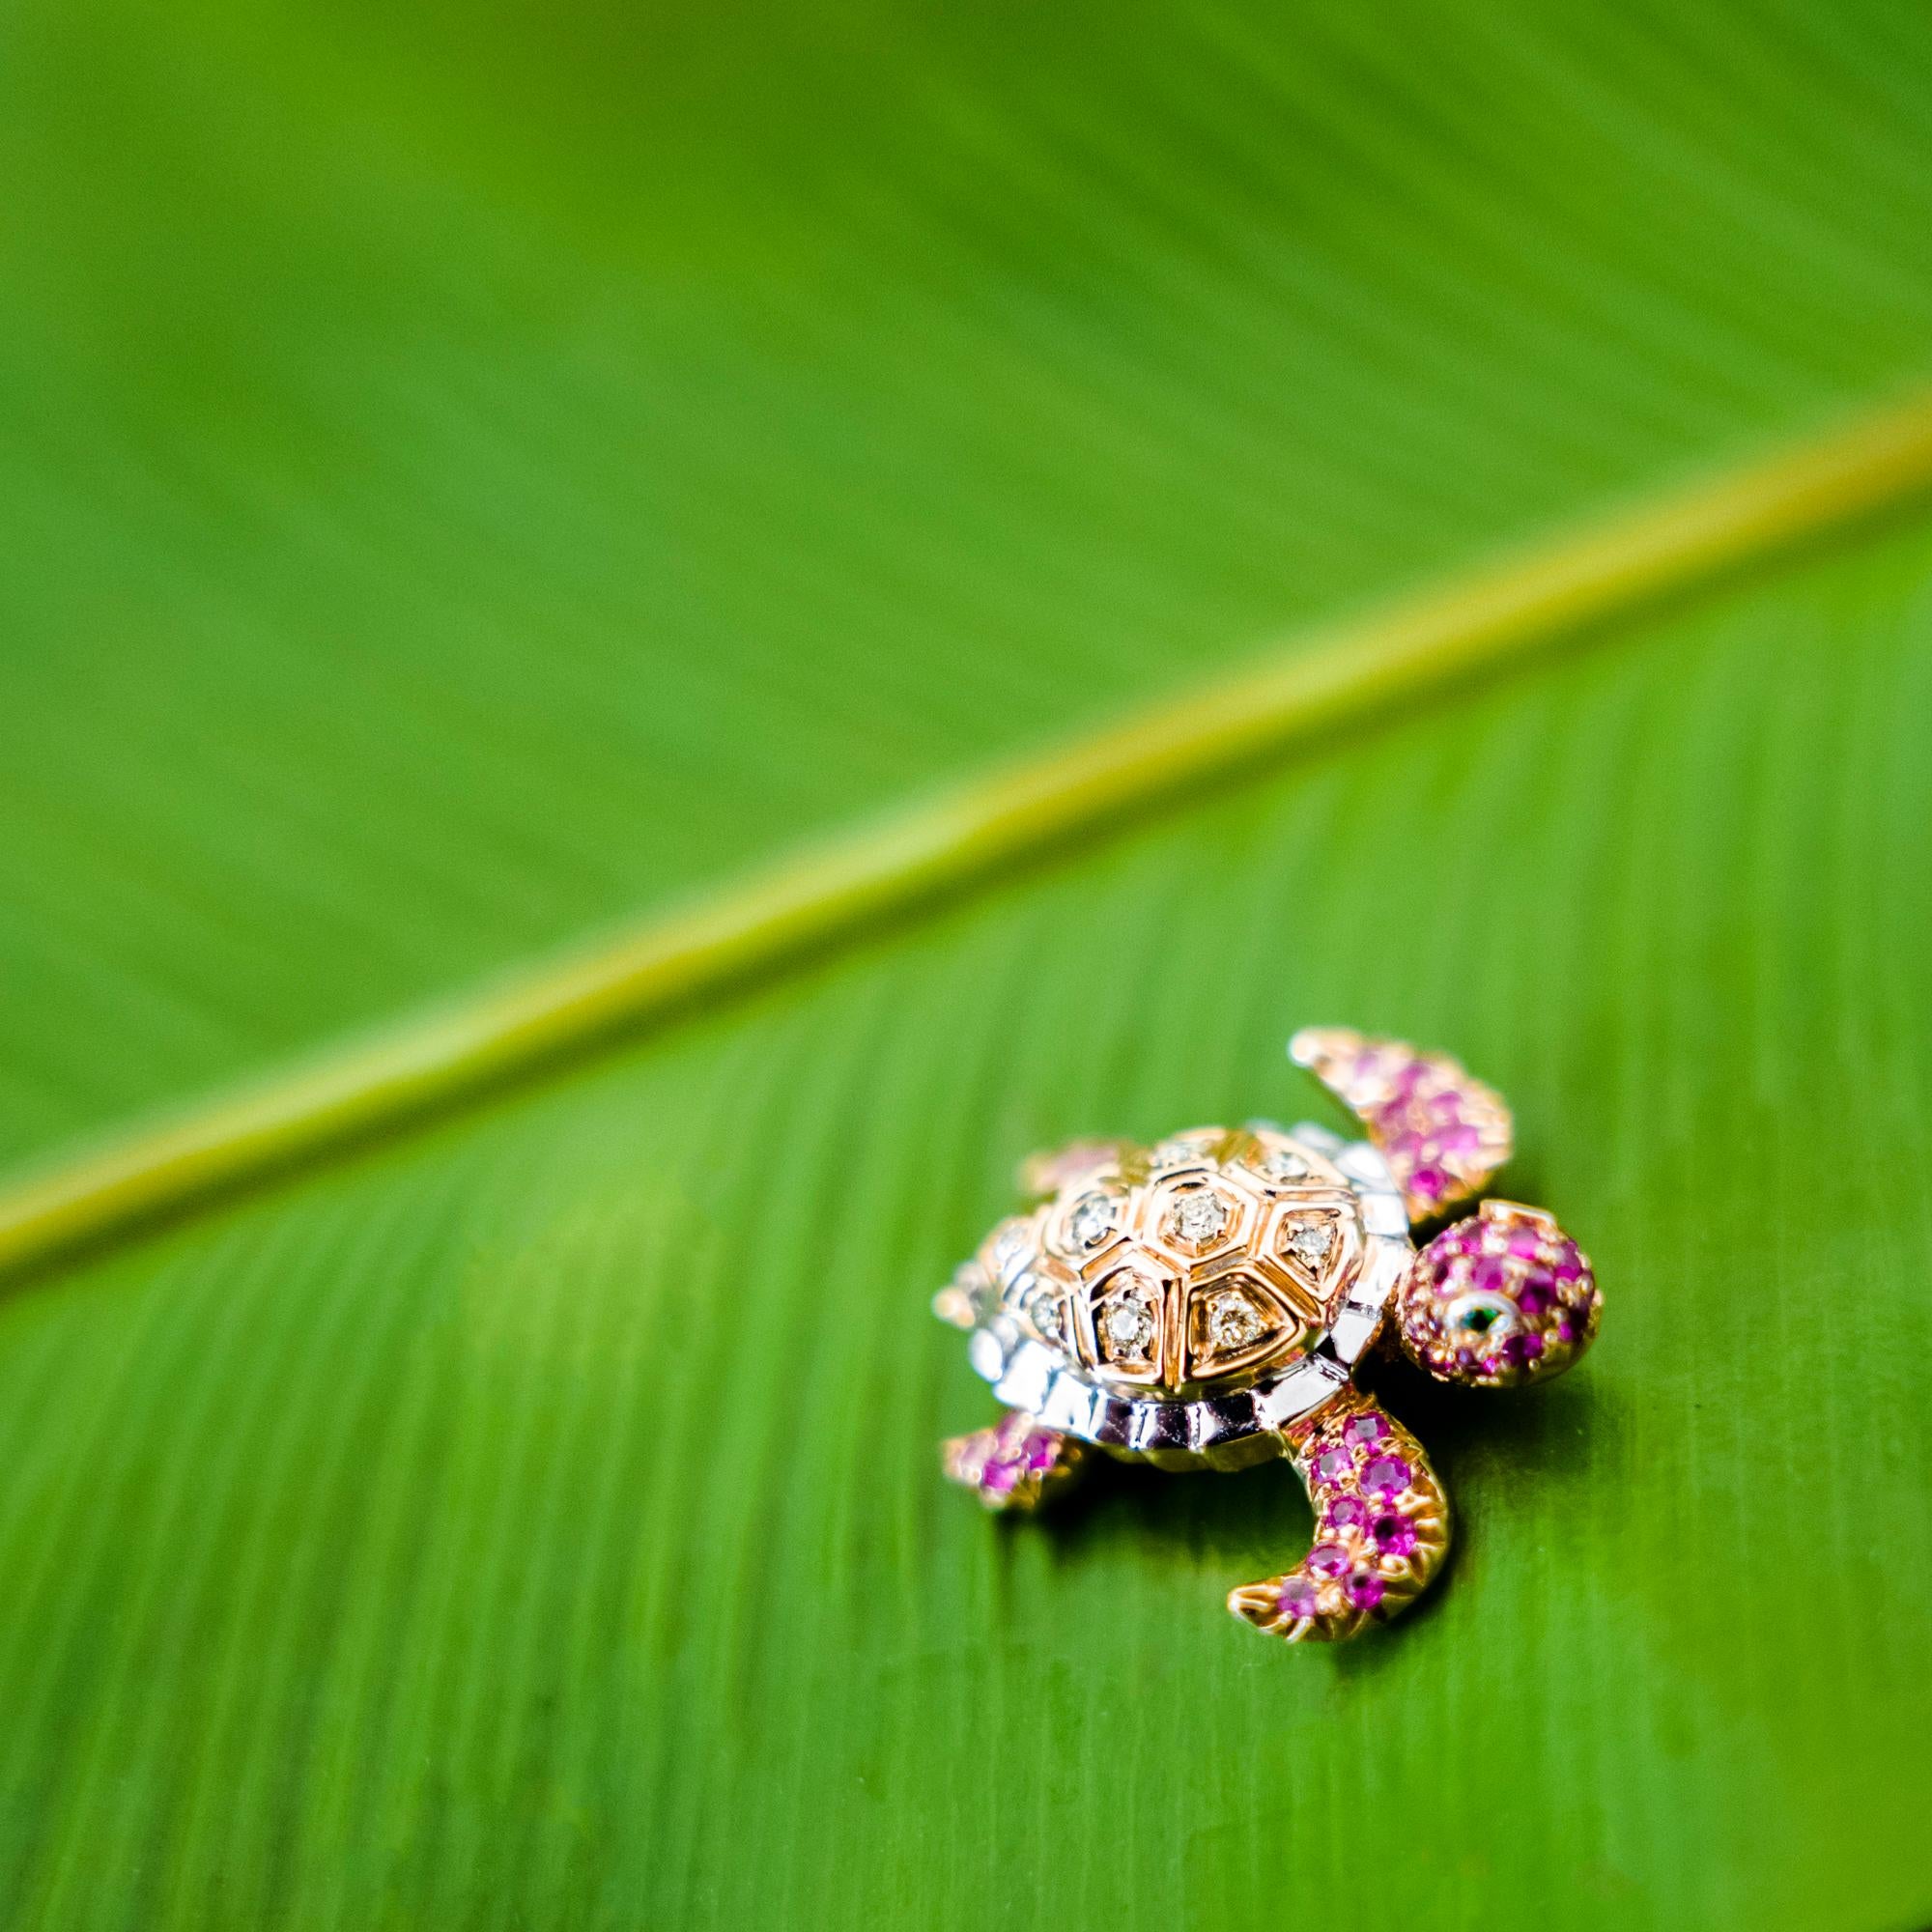 18K Rose Gold Turtle Mixed Diamond and Pink Sapphire Brooch

10 Mixed Colored Diamonds - 0.08 CT
2 Green Garnets - 0.01 CT
23 Pink Sapphires - 0.20 CT
21 Rubies - 0.16 CT
18K Rose Gold - 3.96 GM

Turtle represents intuitive development, protection,